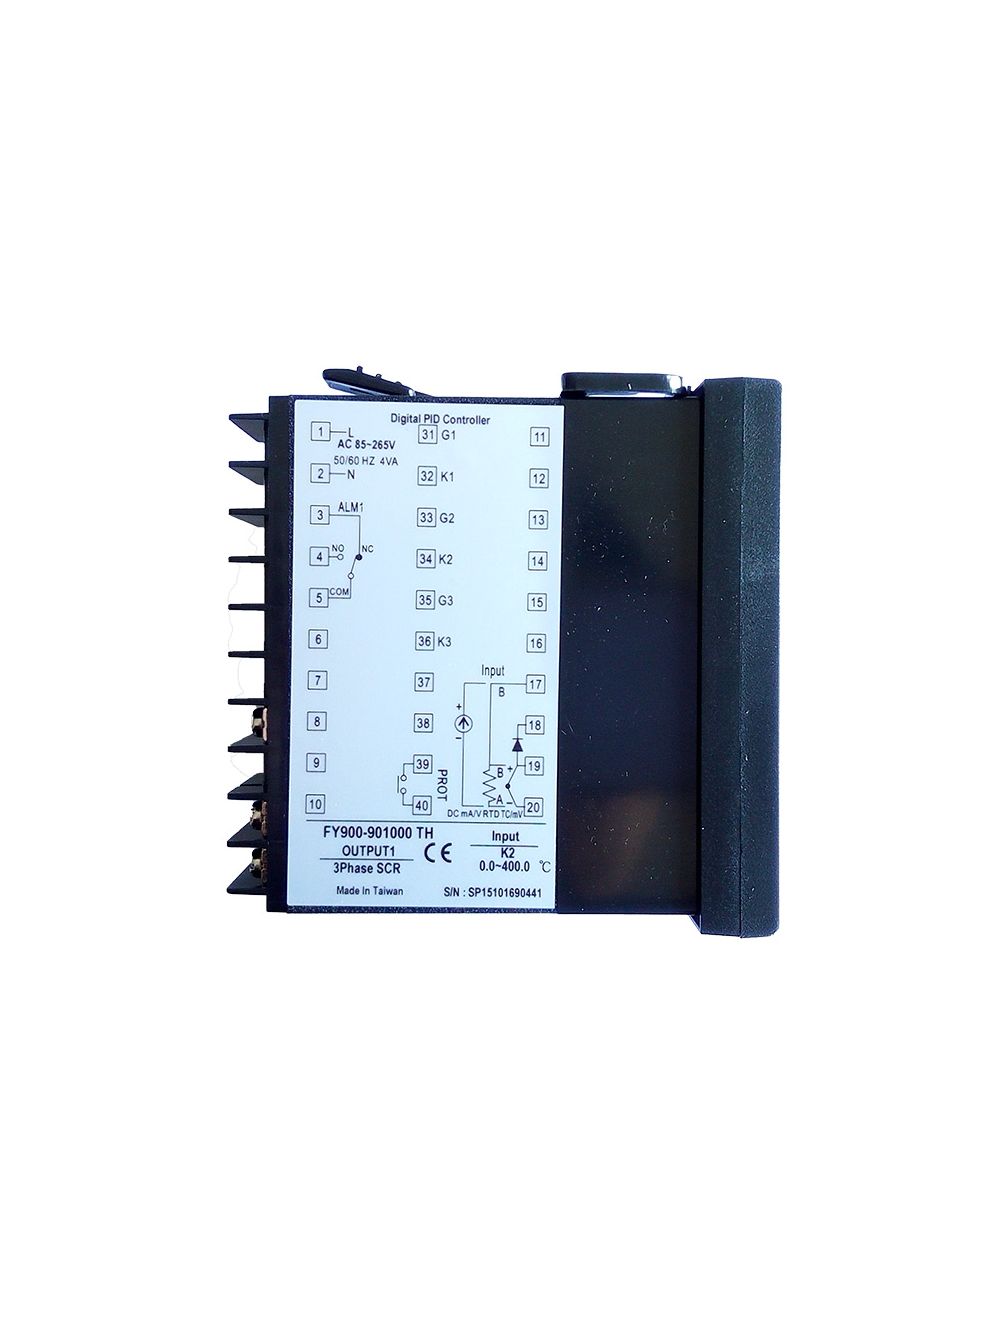 New In stock for sale, TAIE Temperature Controller FY900-901000TH